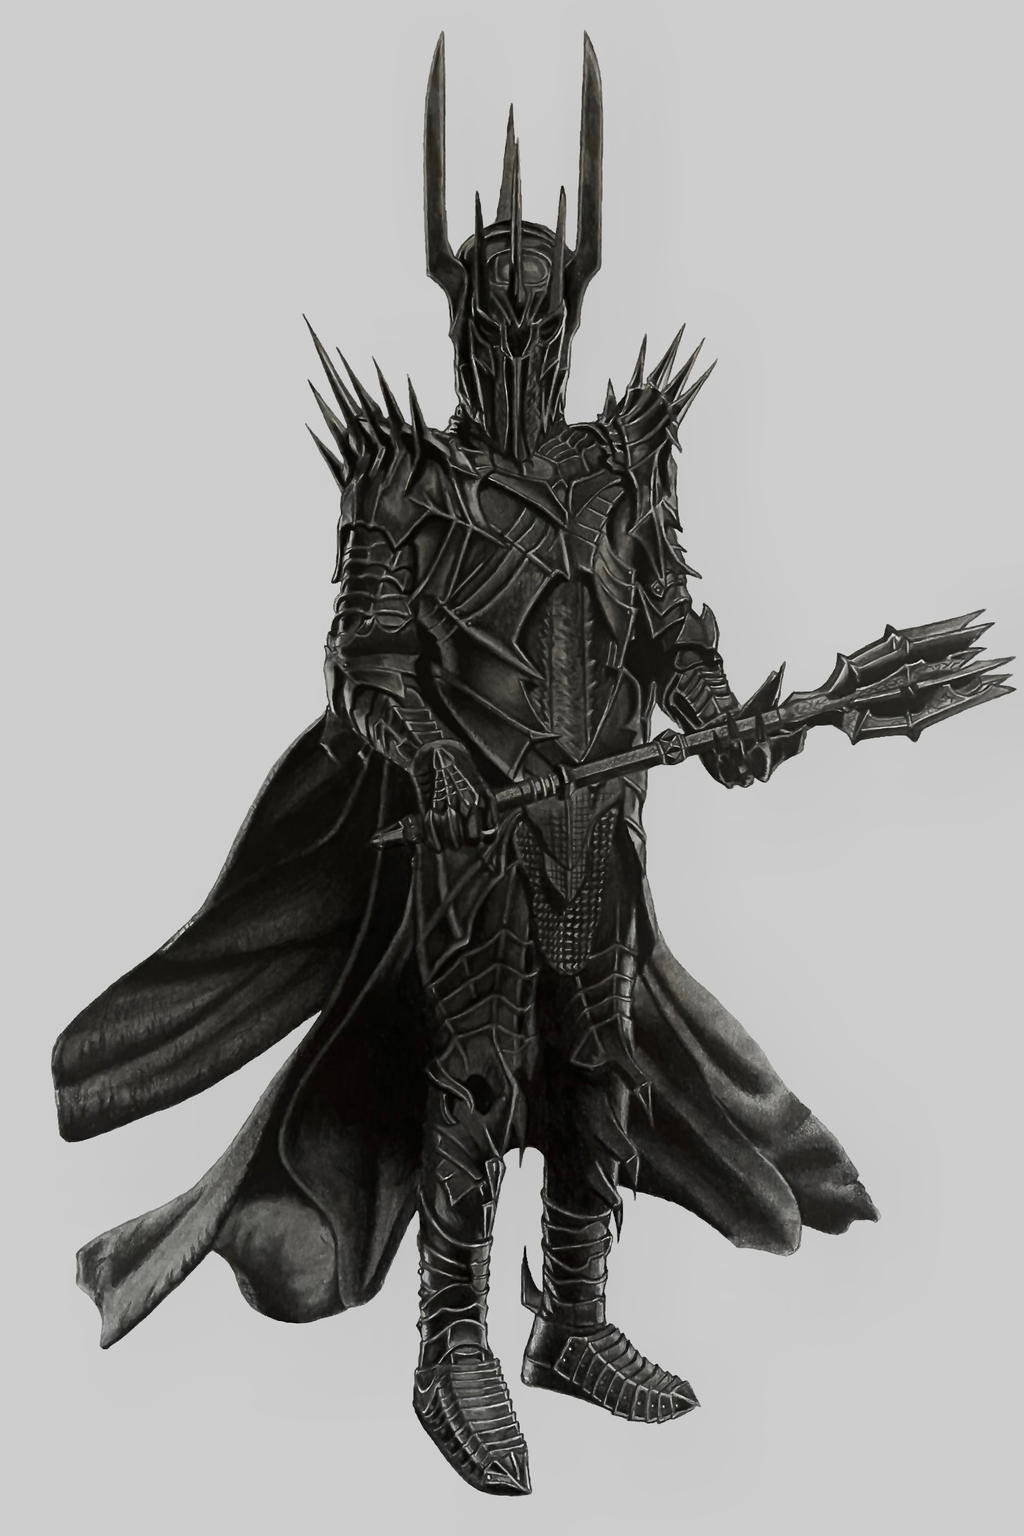 Sauron and Black Hand by dead01 on DeviantArt